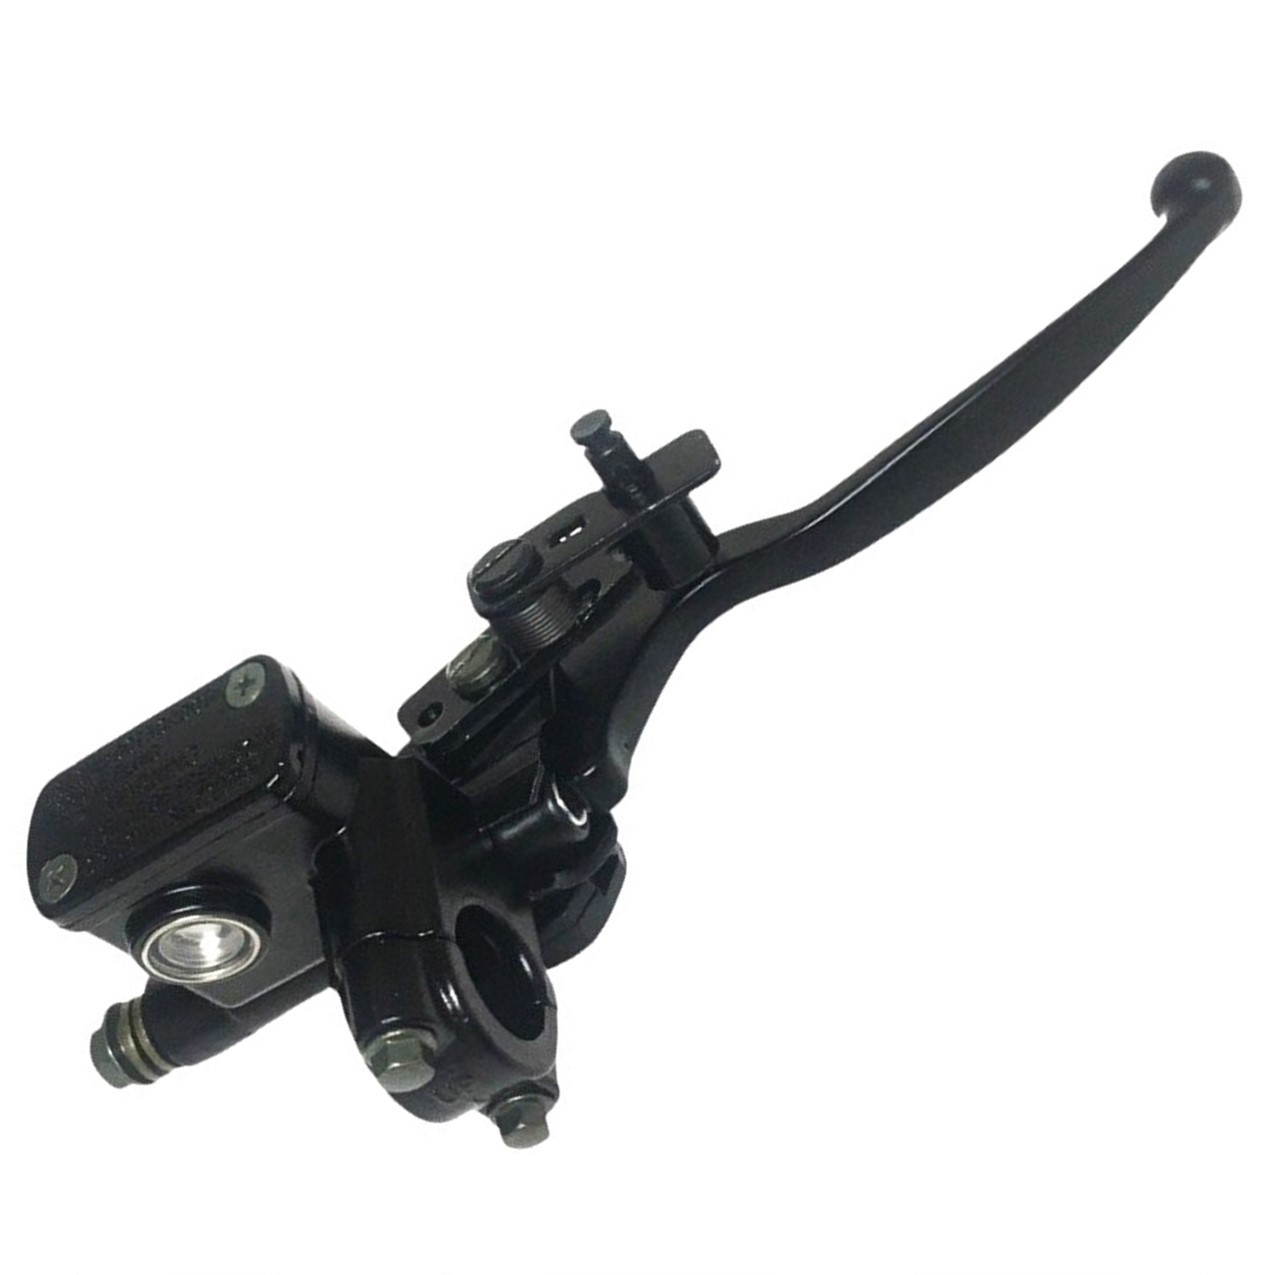 Front Brake Master Cylinder with Parking Brake, Comes with 2 Brake Switch Fits Many ATVs-DirtBikes